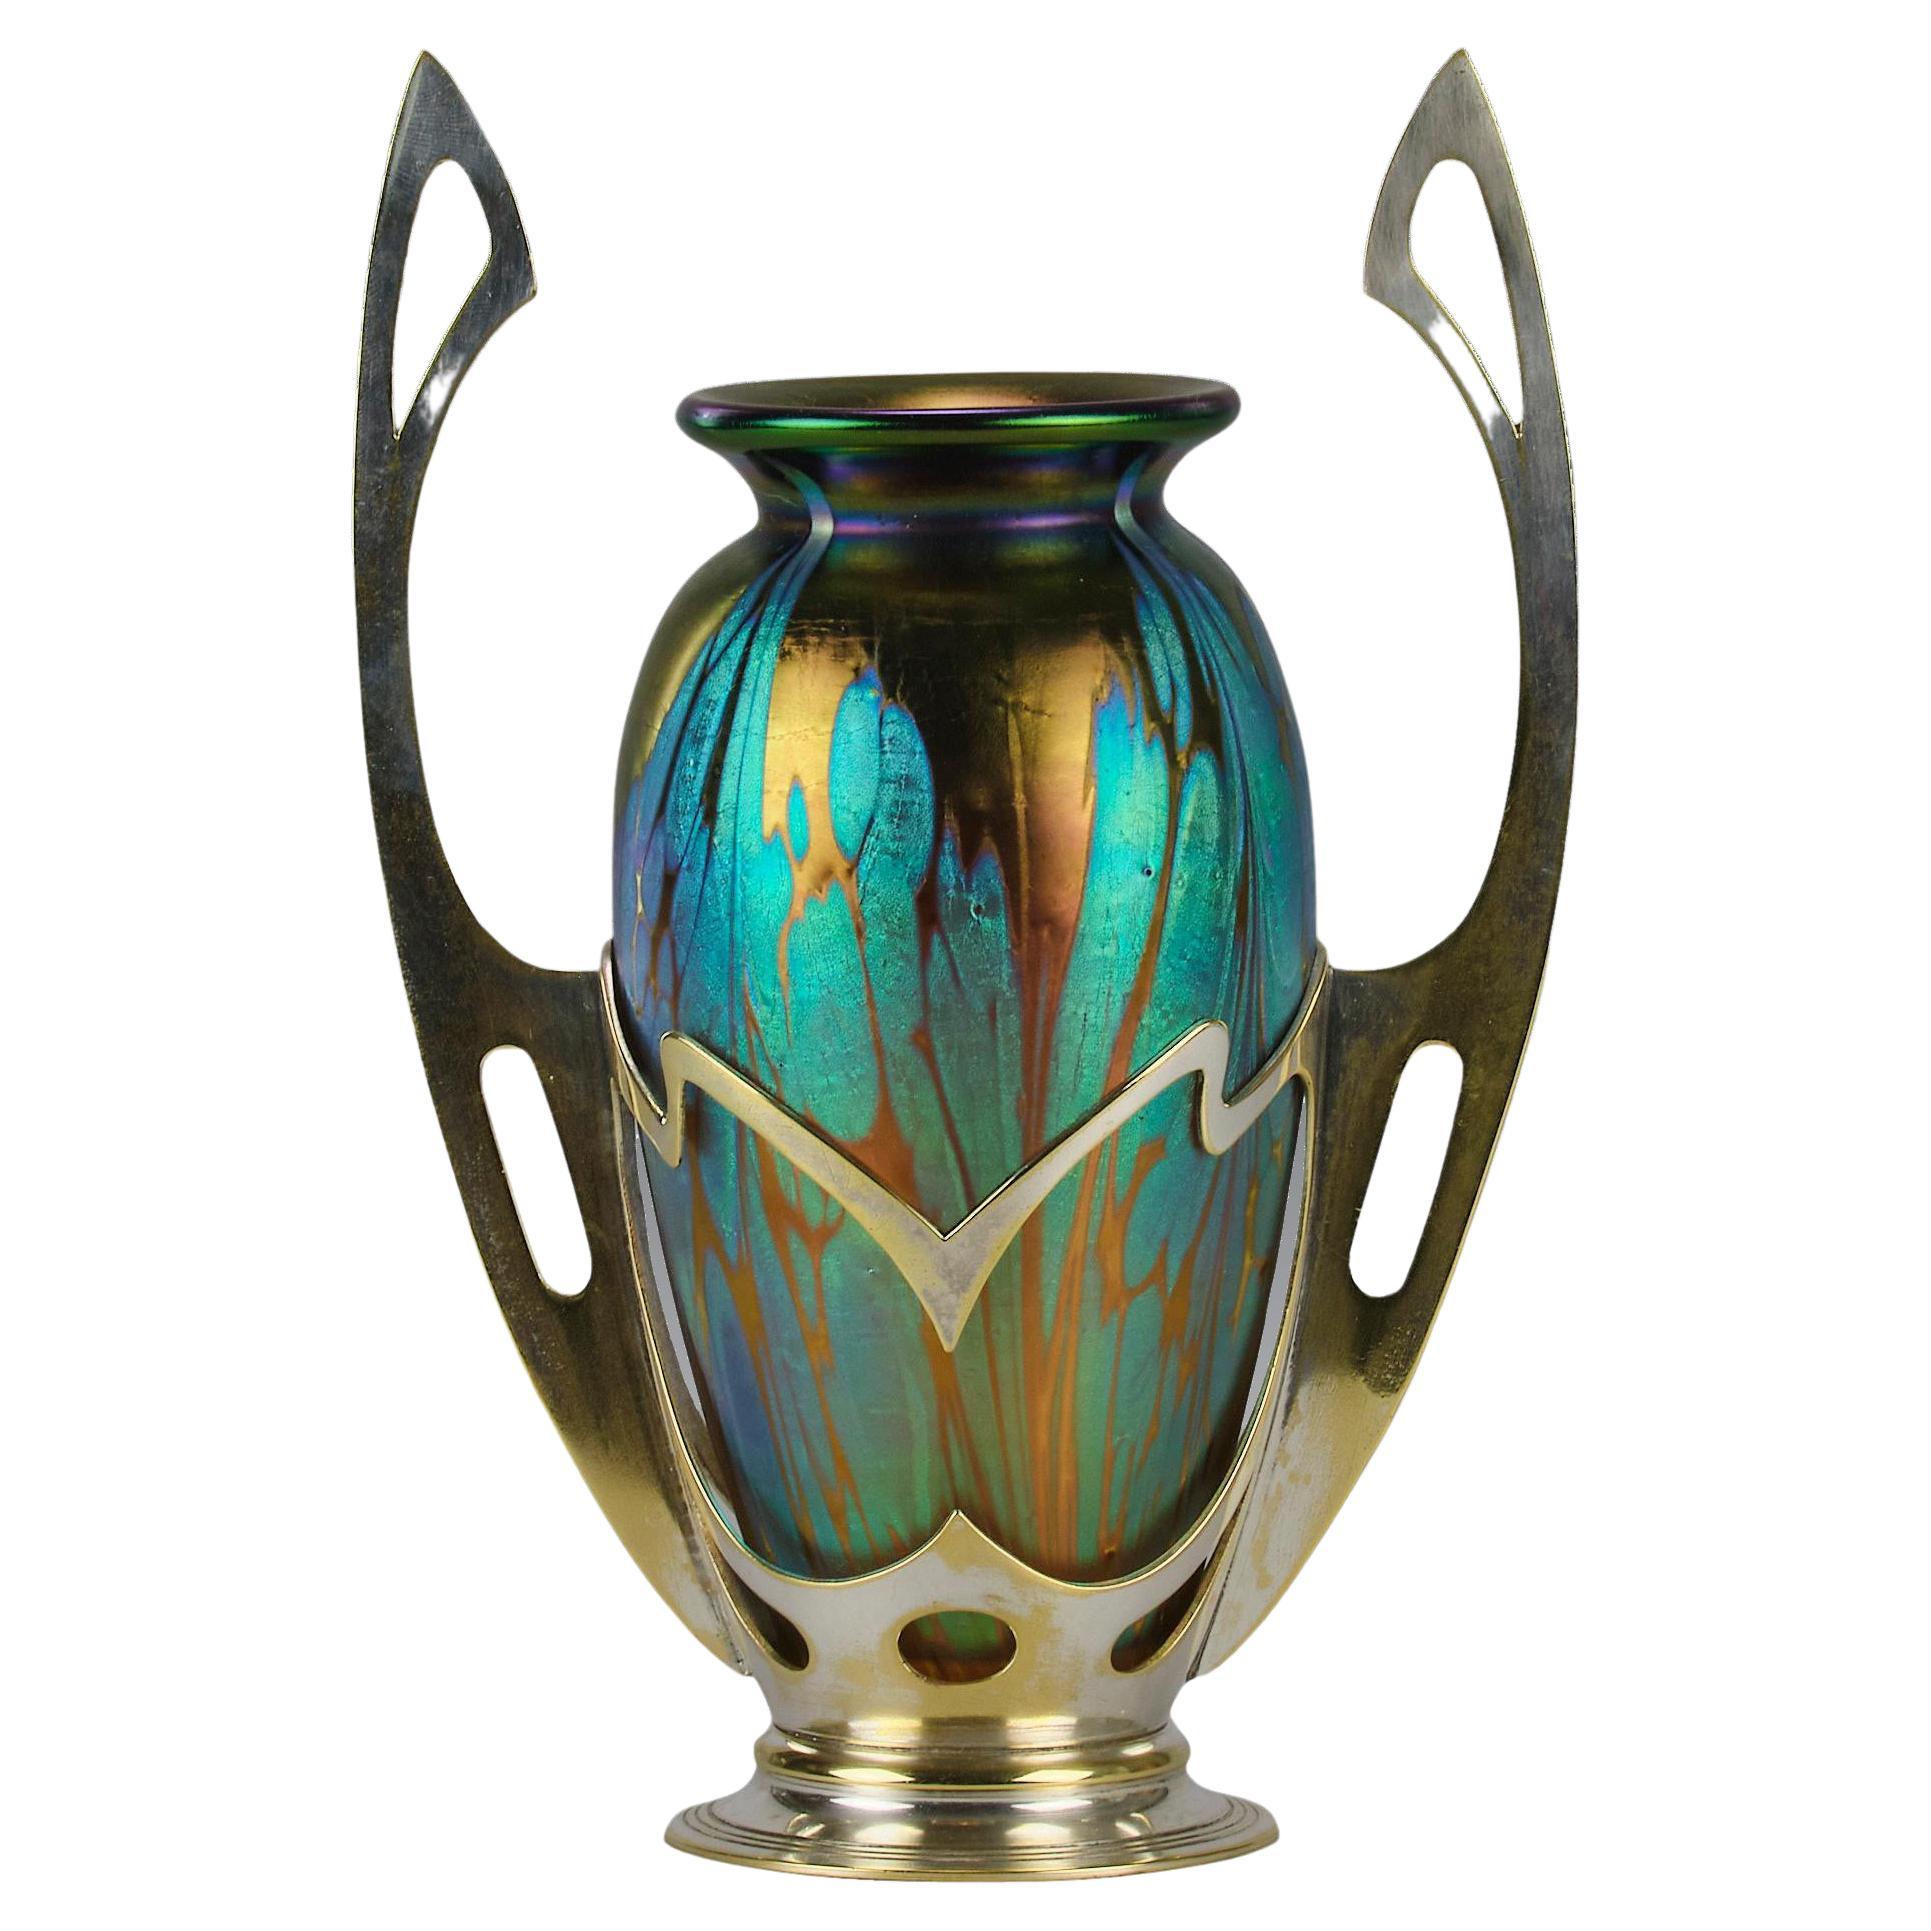 Early 20th Century Art Nouveau Vase entitled "Secessionist Vase" by Loetz  Witwe For Sale at 1stDibs